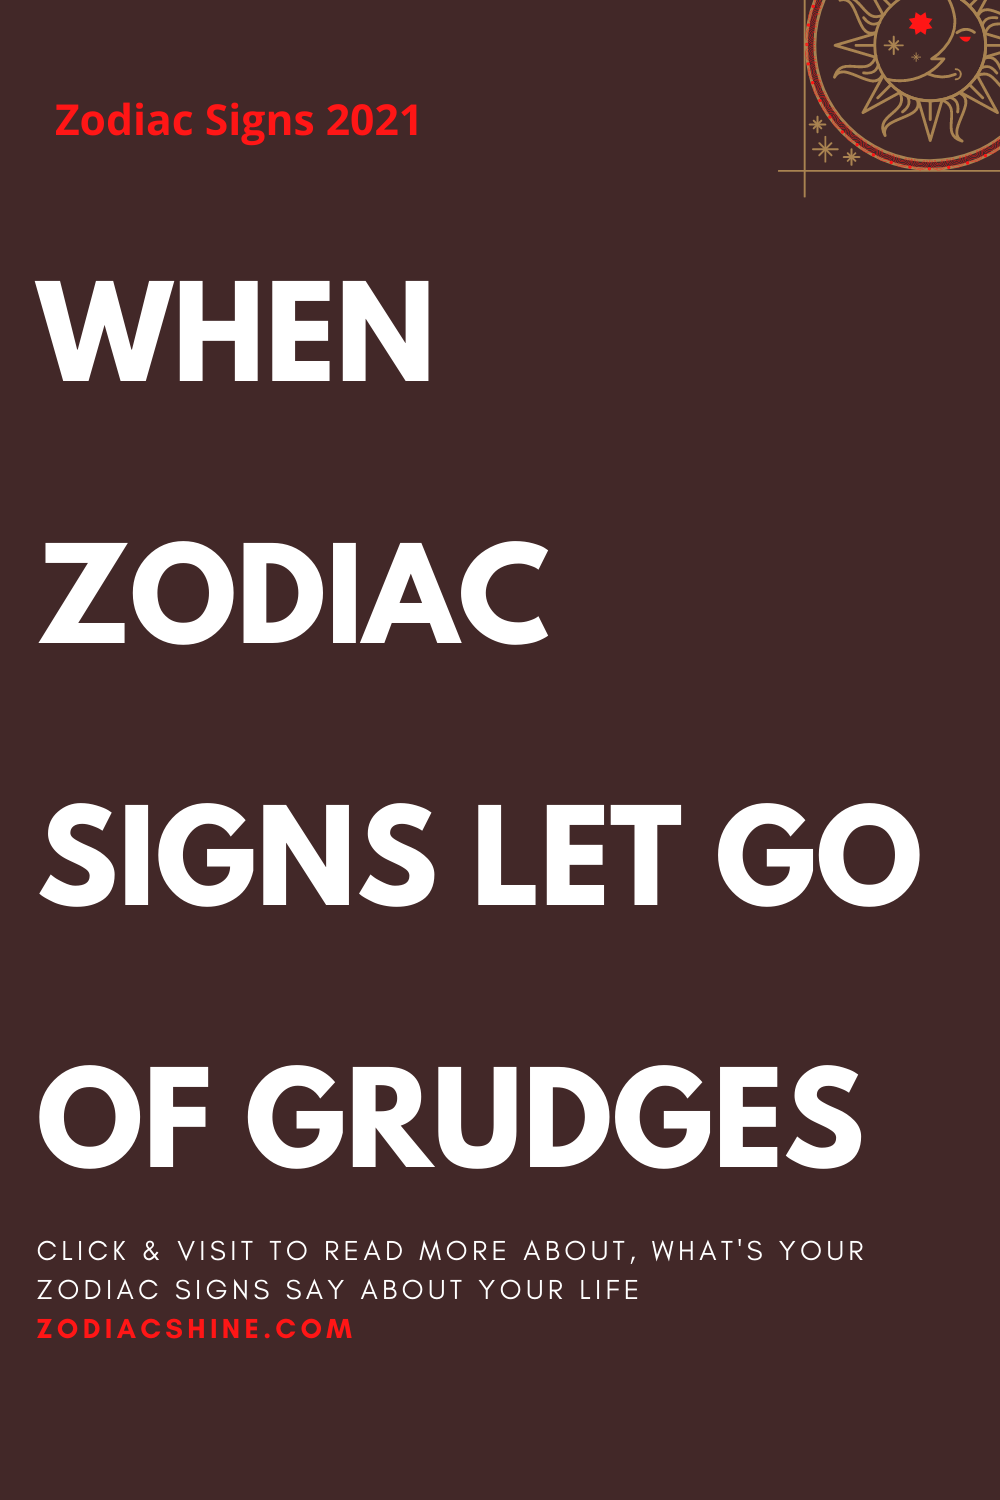 WHEN ZODIAC SIGNS LET GO OF GRUDGES